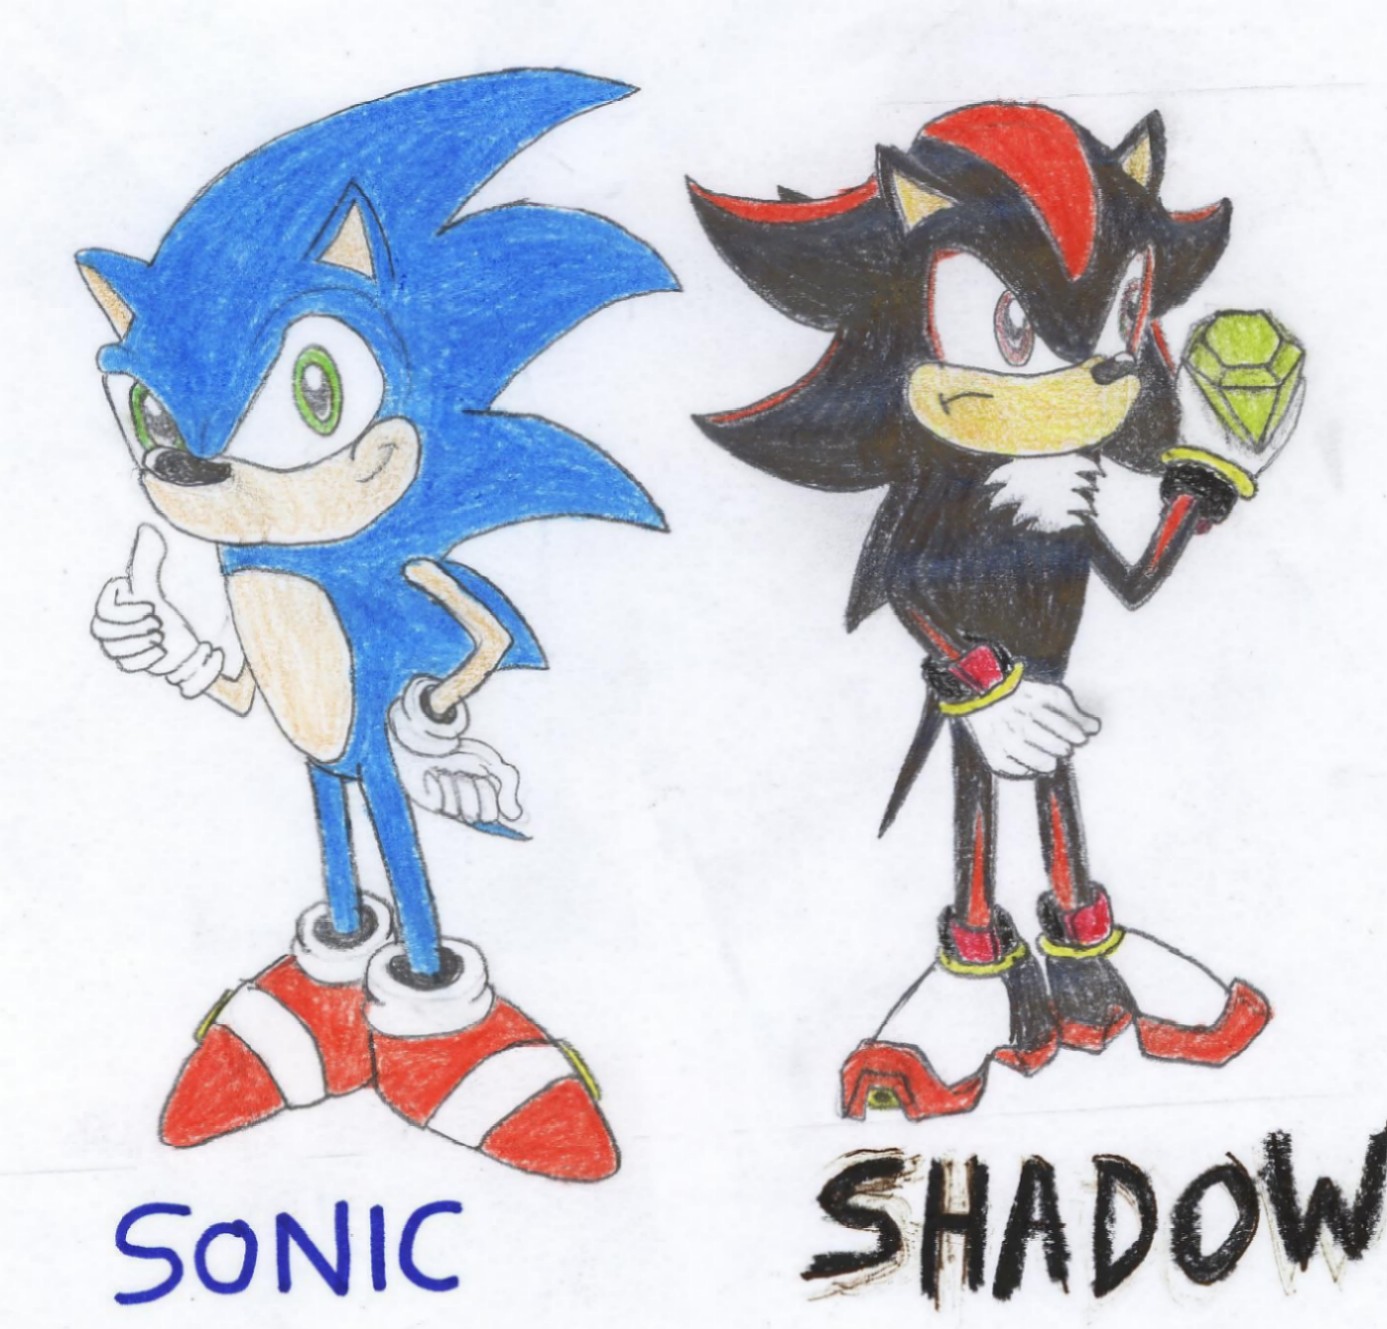 Sonic and Shadow by andre_ant